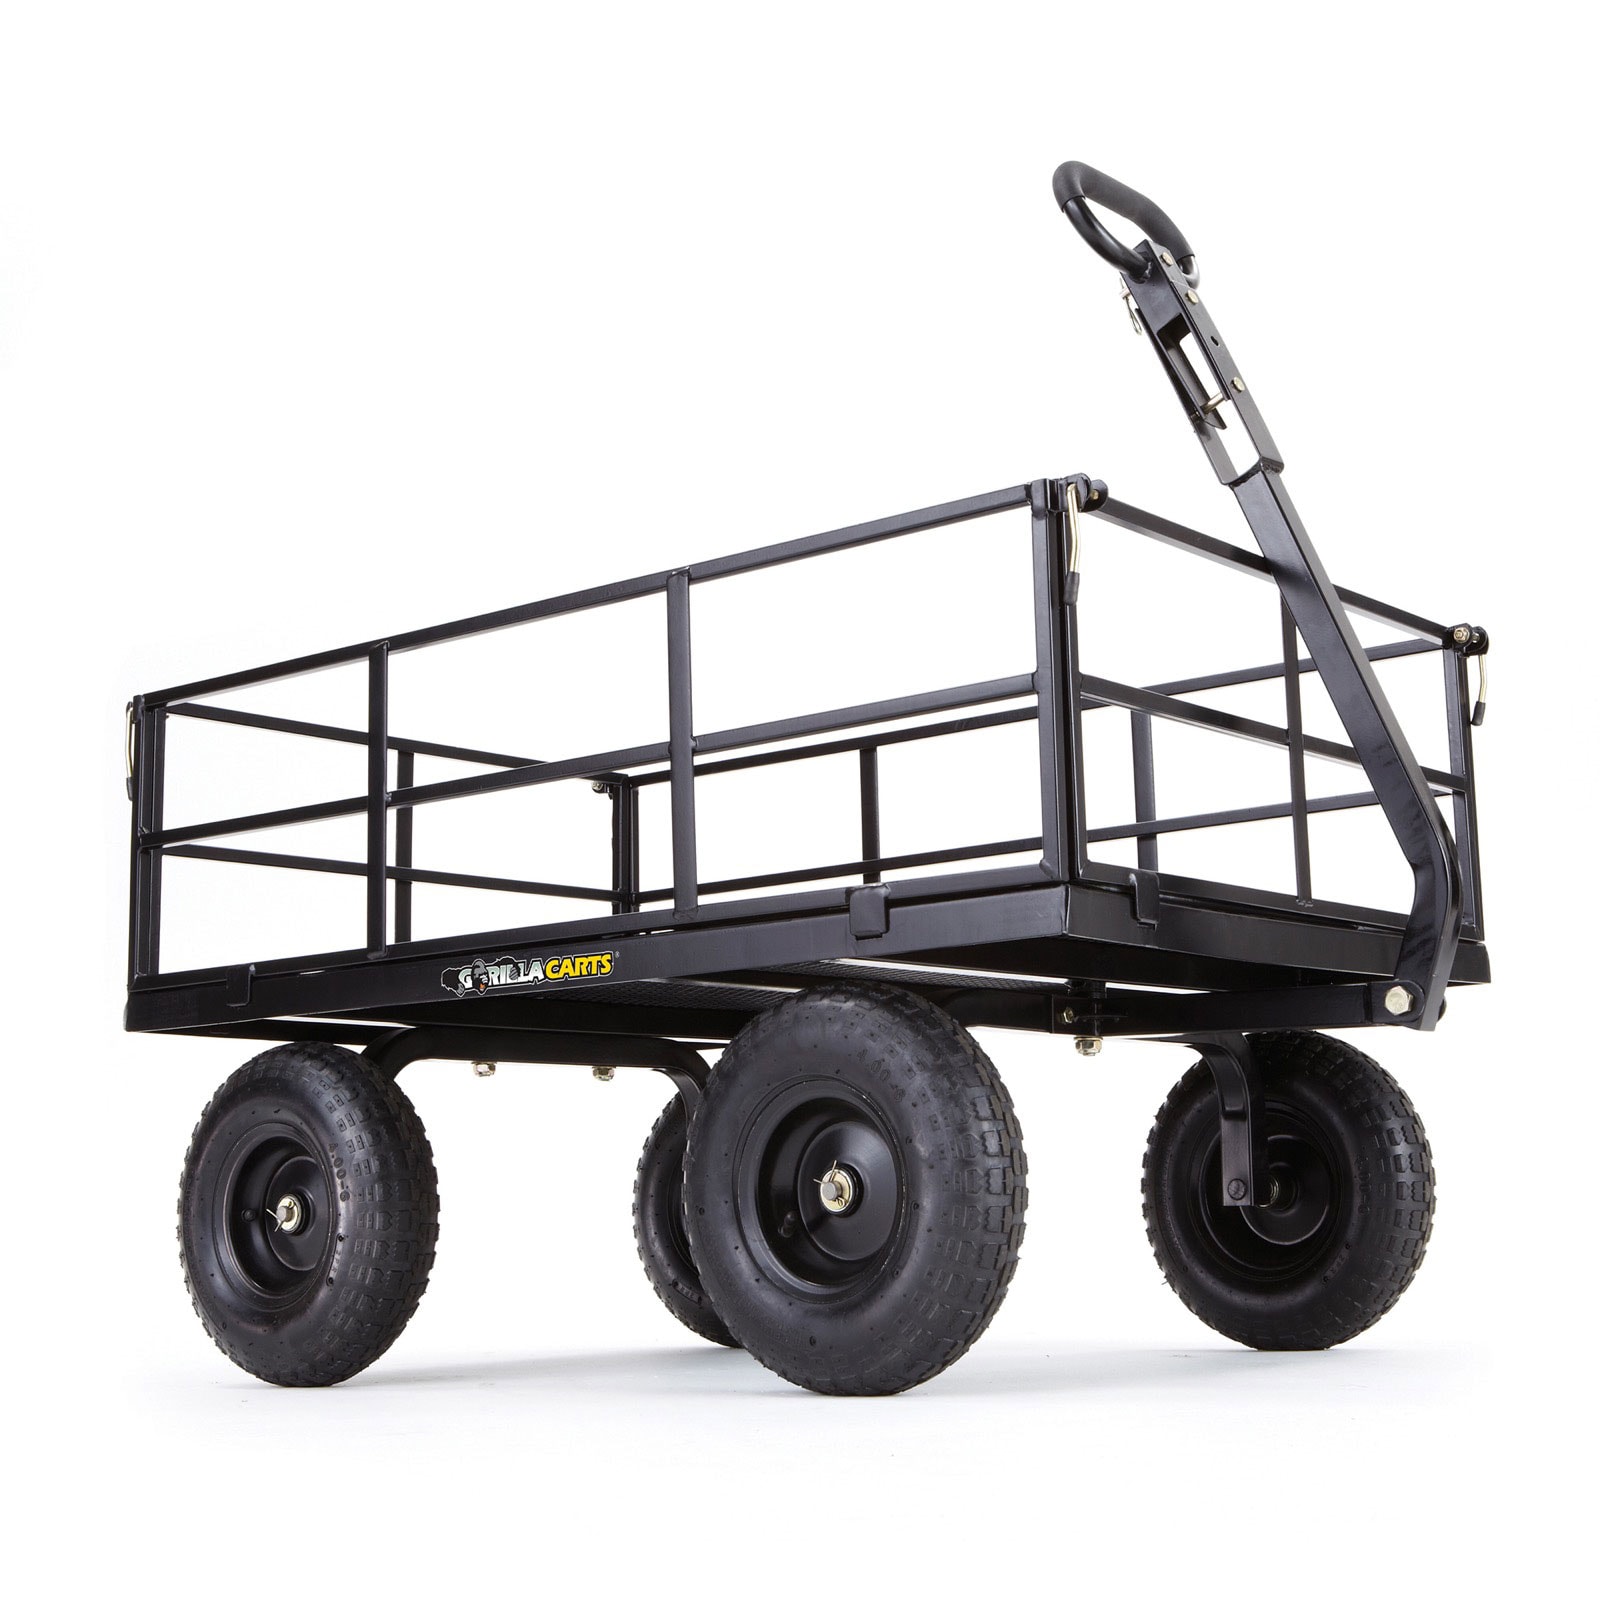 Mighty Max Cart Utility Hand Truck Dolly Black Tub